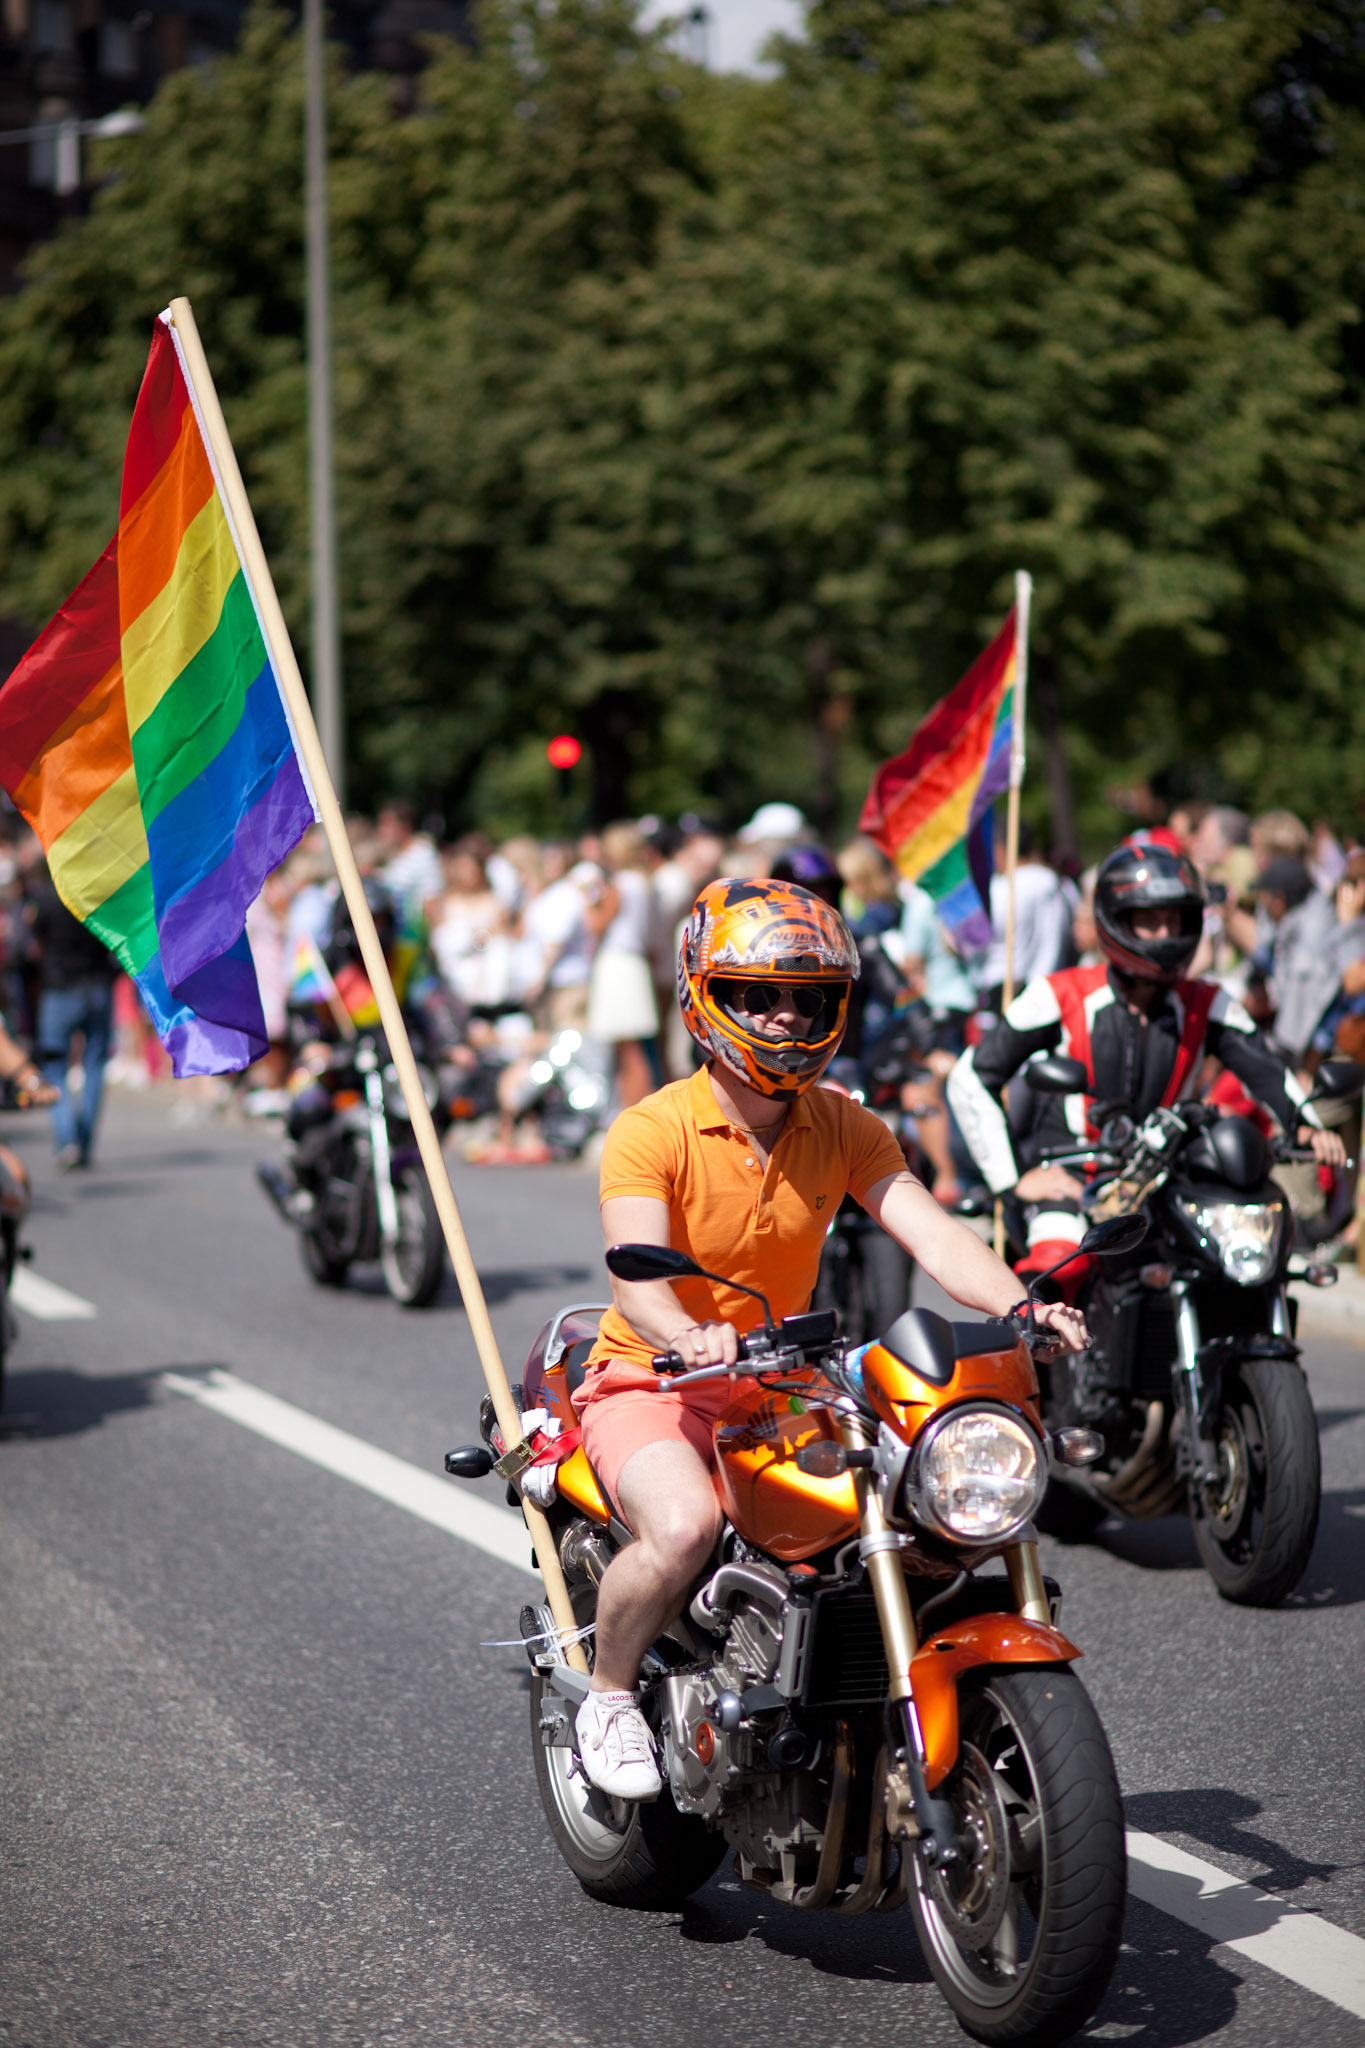 a group of people riding motorcycles holding flags